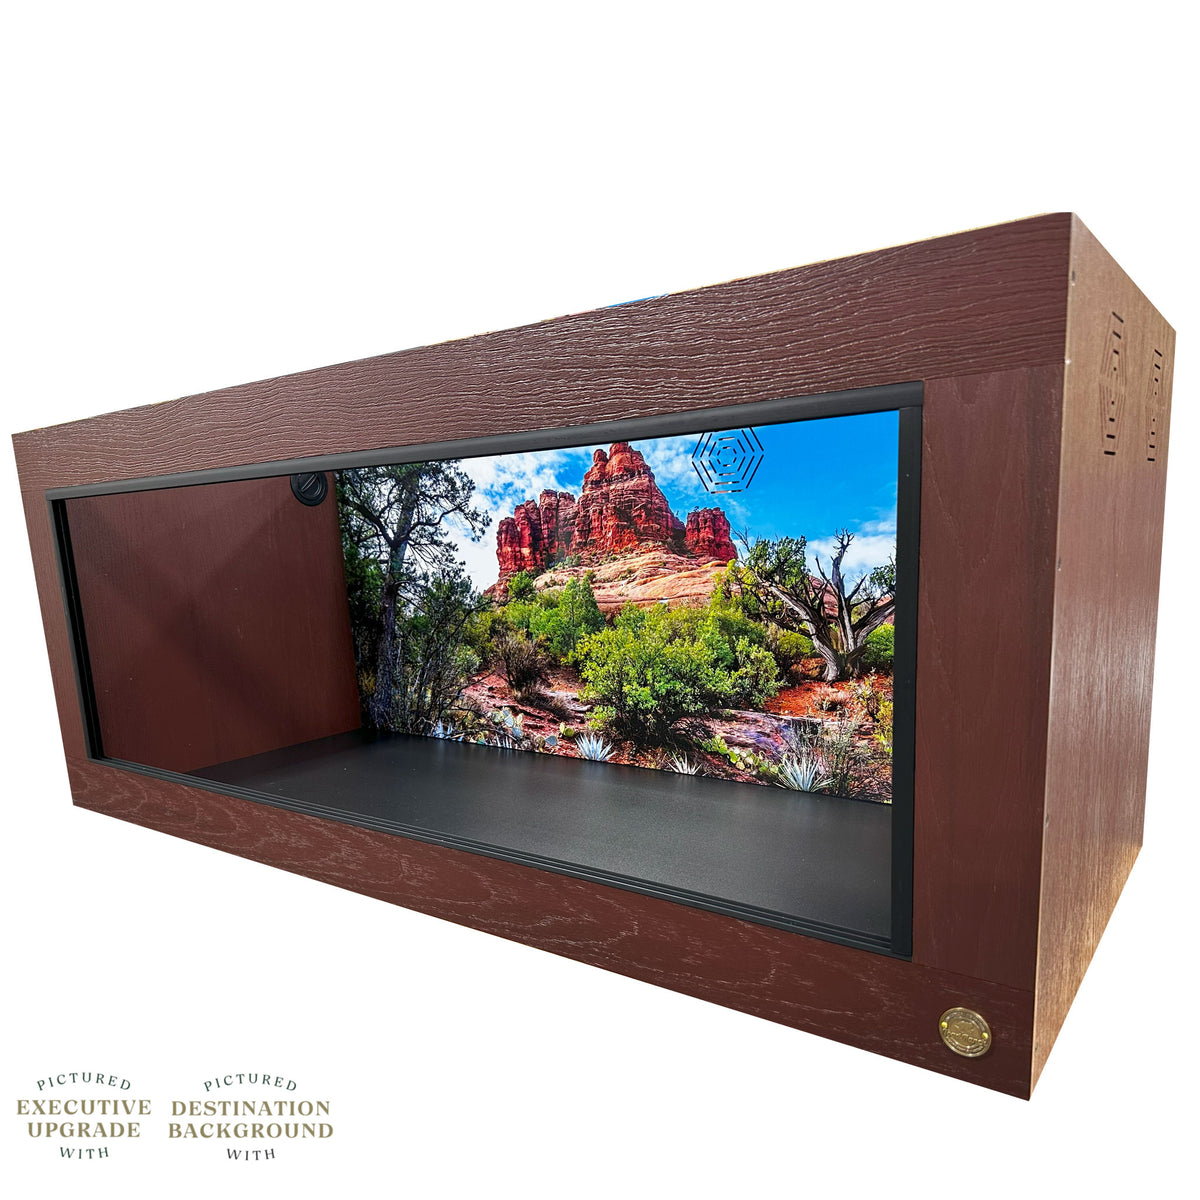 Top quality reptile habitat, featuring mahogany front frame with Executive Upgrade and Destination Background